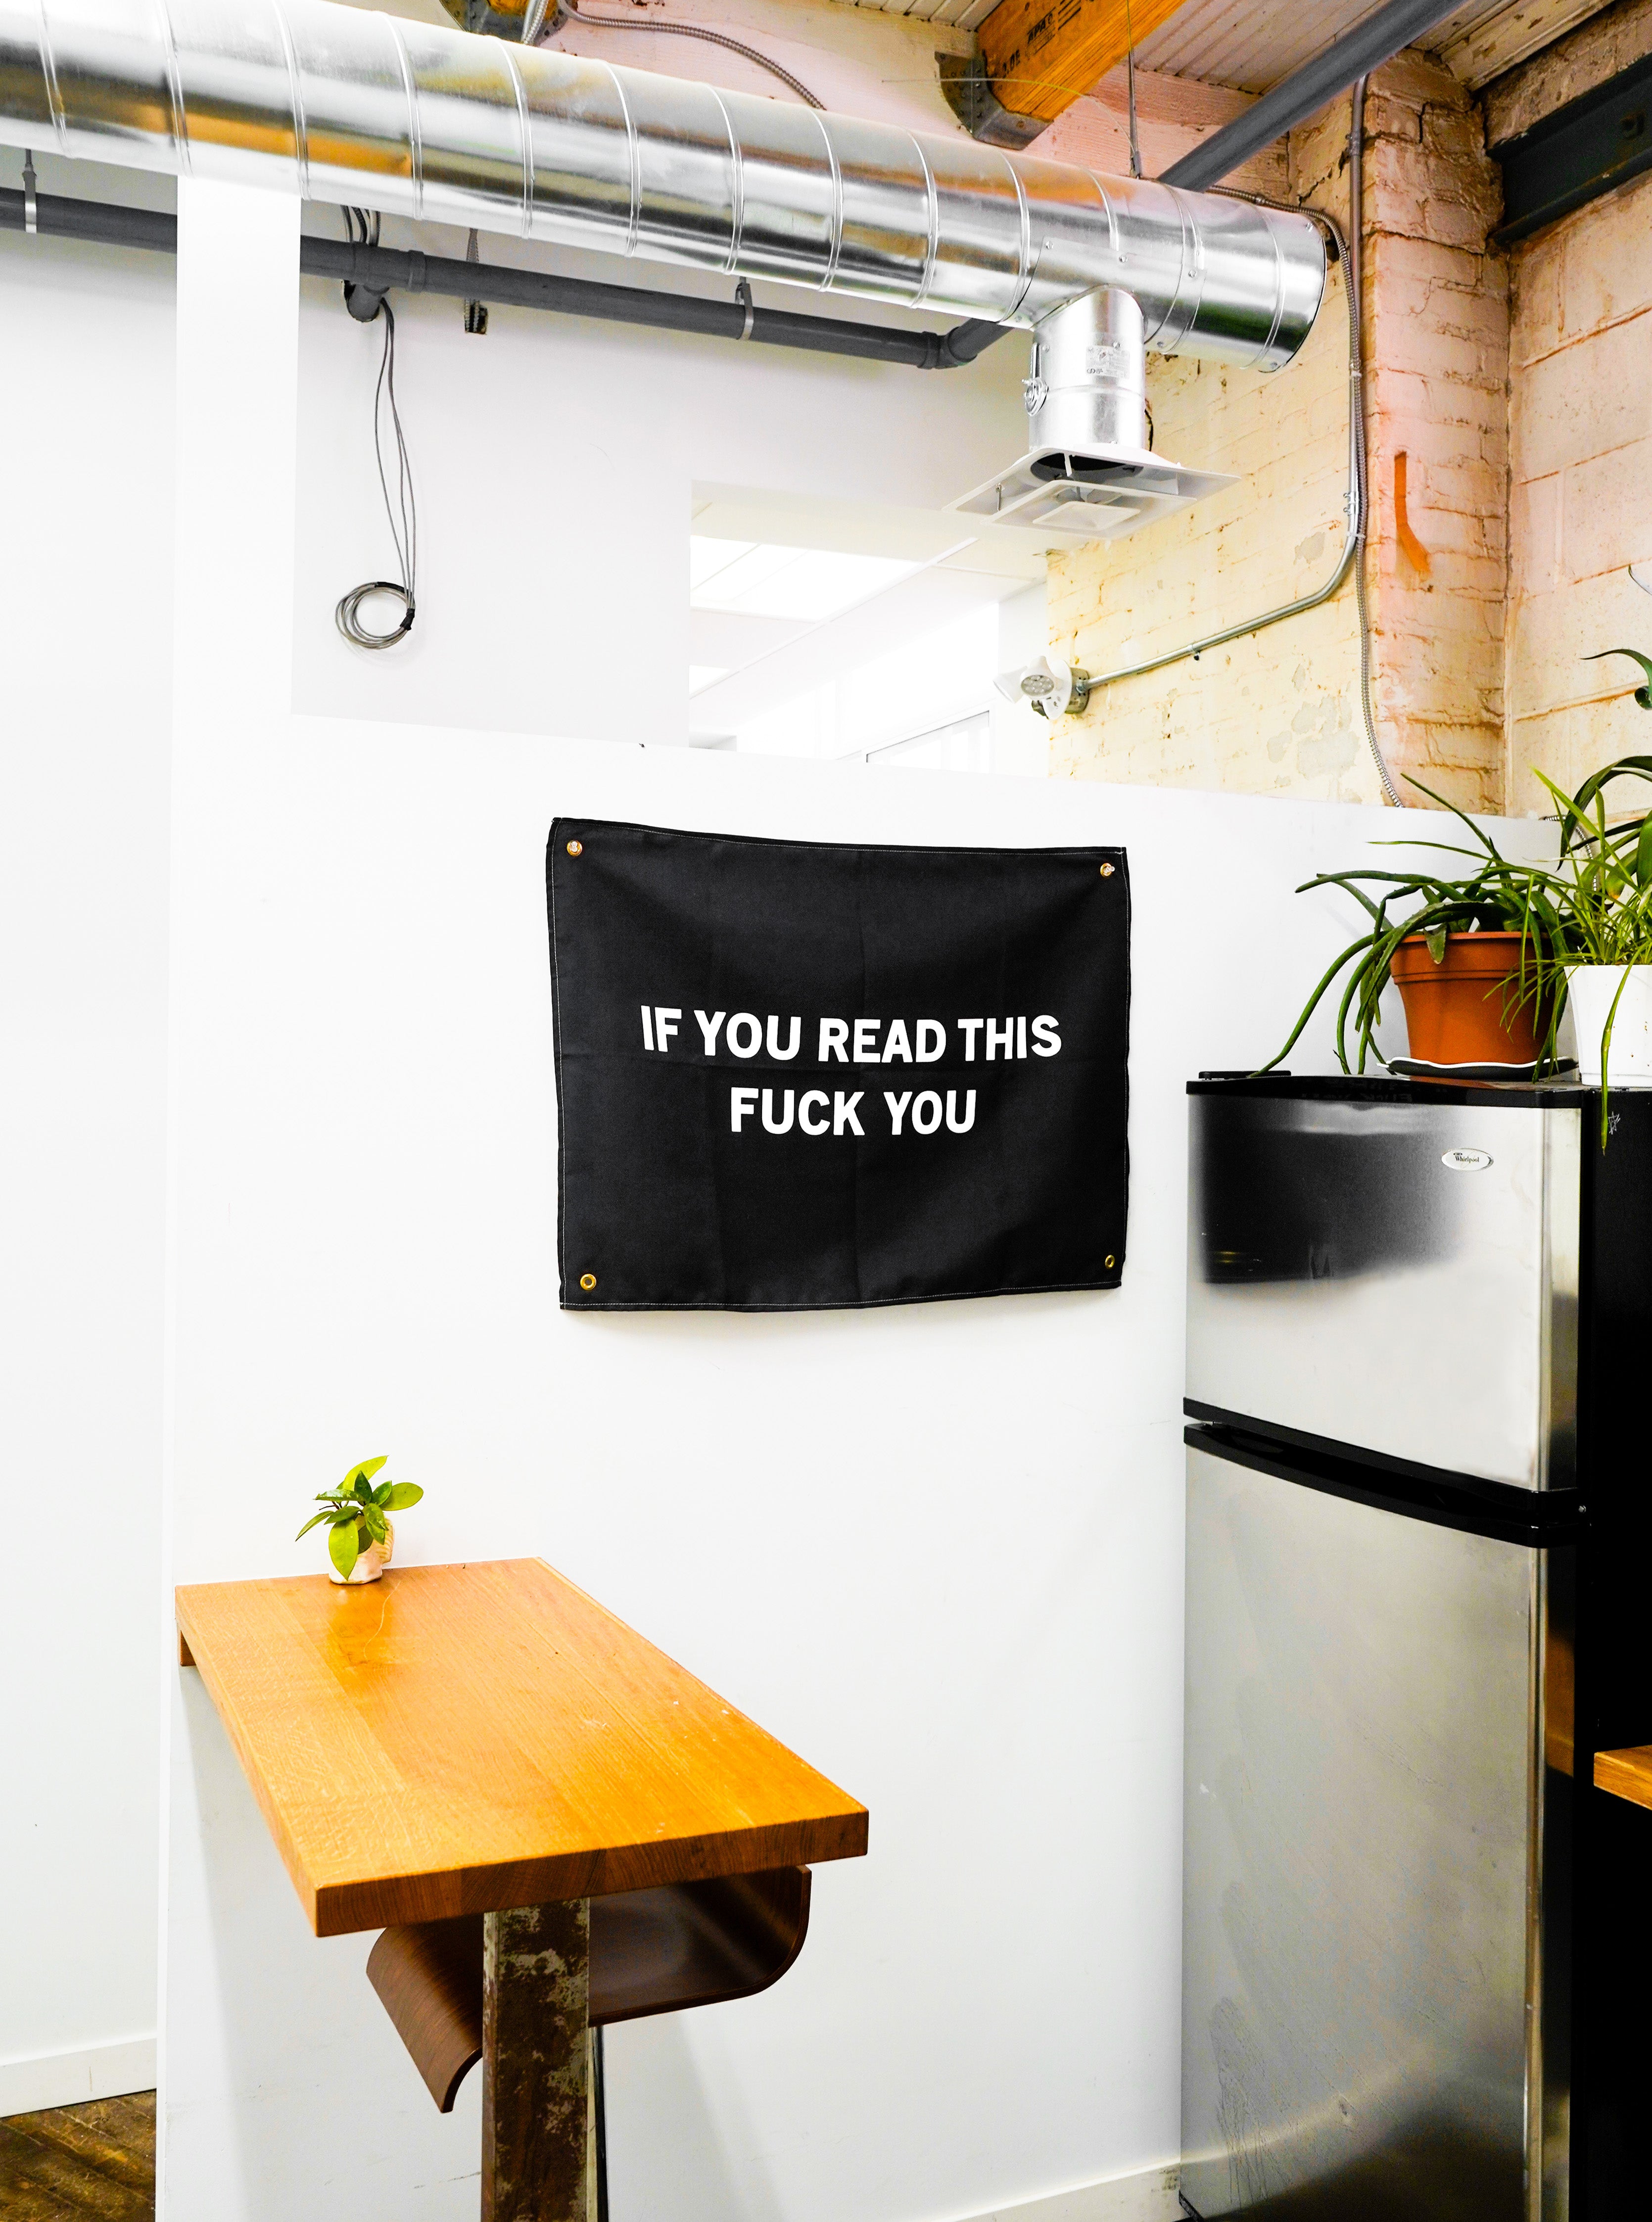 The "Read More" Wall tapestry by No Fun®. Tapestry is black, and features the phrase "IF YOU READ THIS FUCK YOU" in large white letters. There is 1 brass grommet in each corner of the tapestry.  Tapestry is hung on a wall in a kitchen.